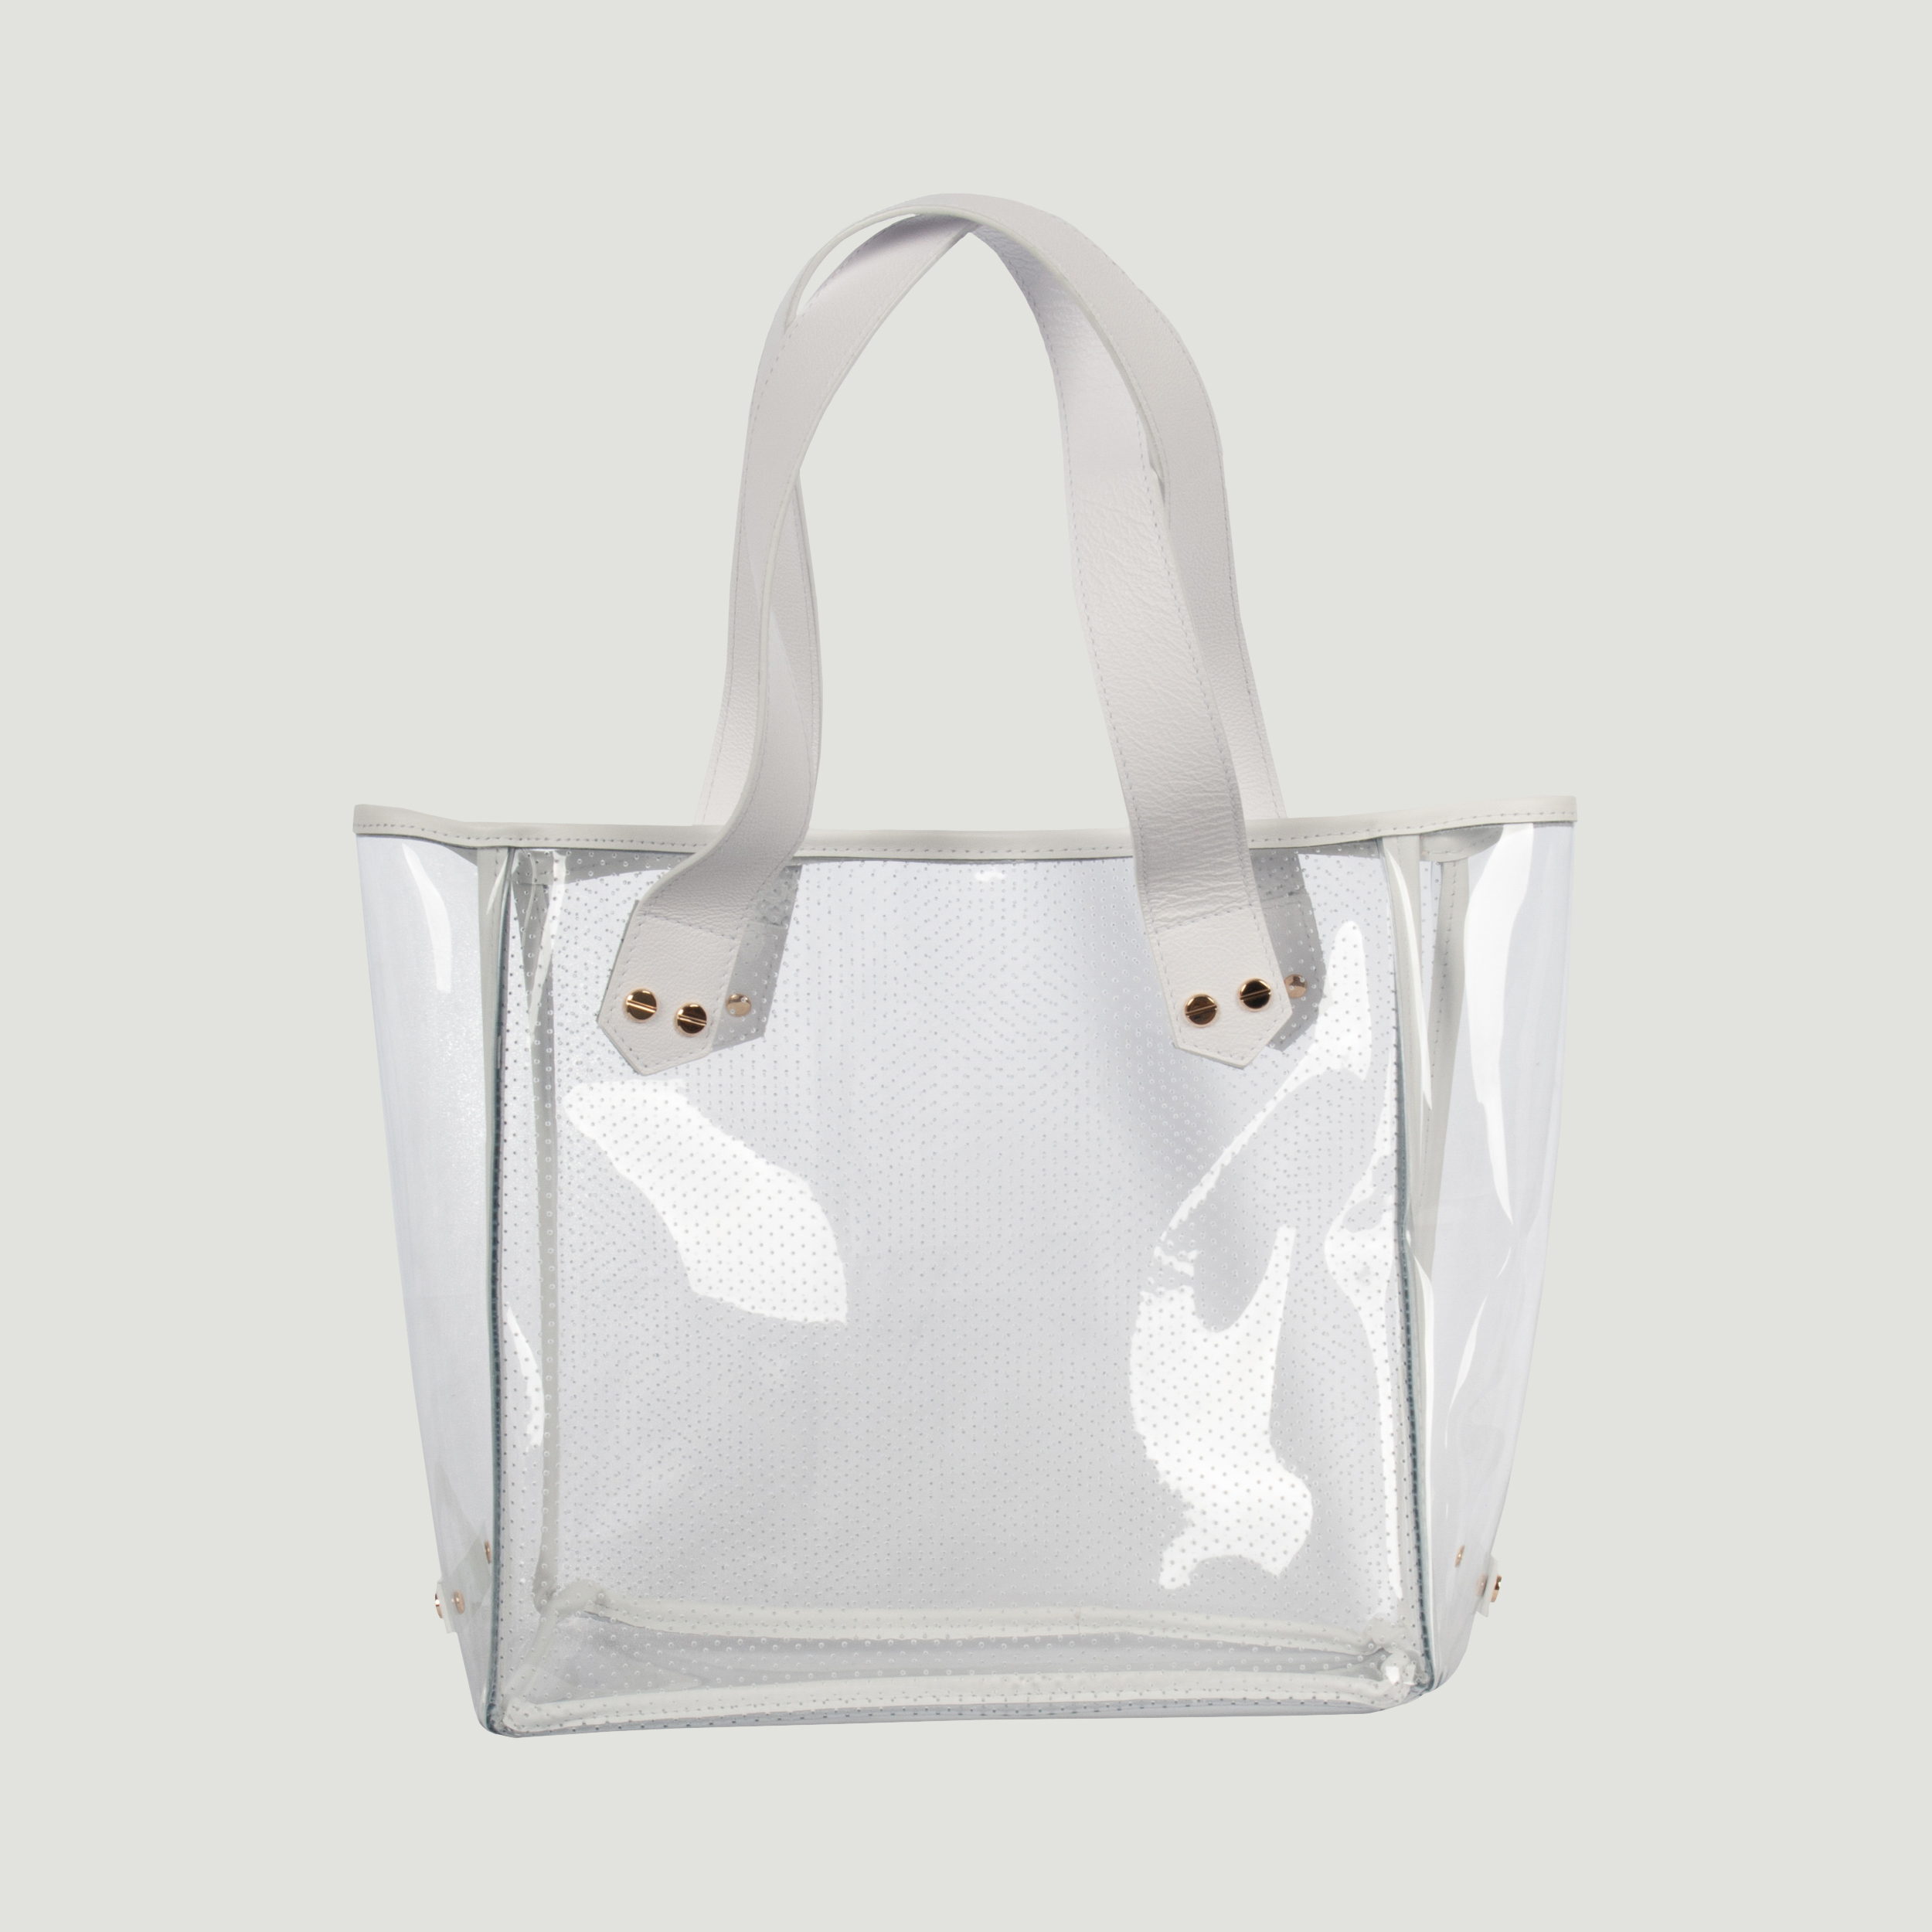 Clear Plastic Tote Bags with Handles for NFL Games